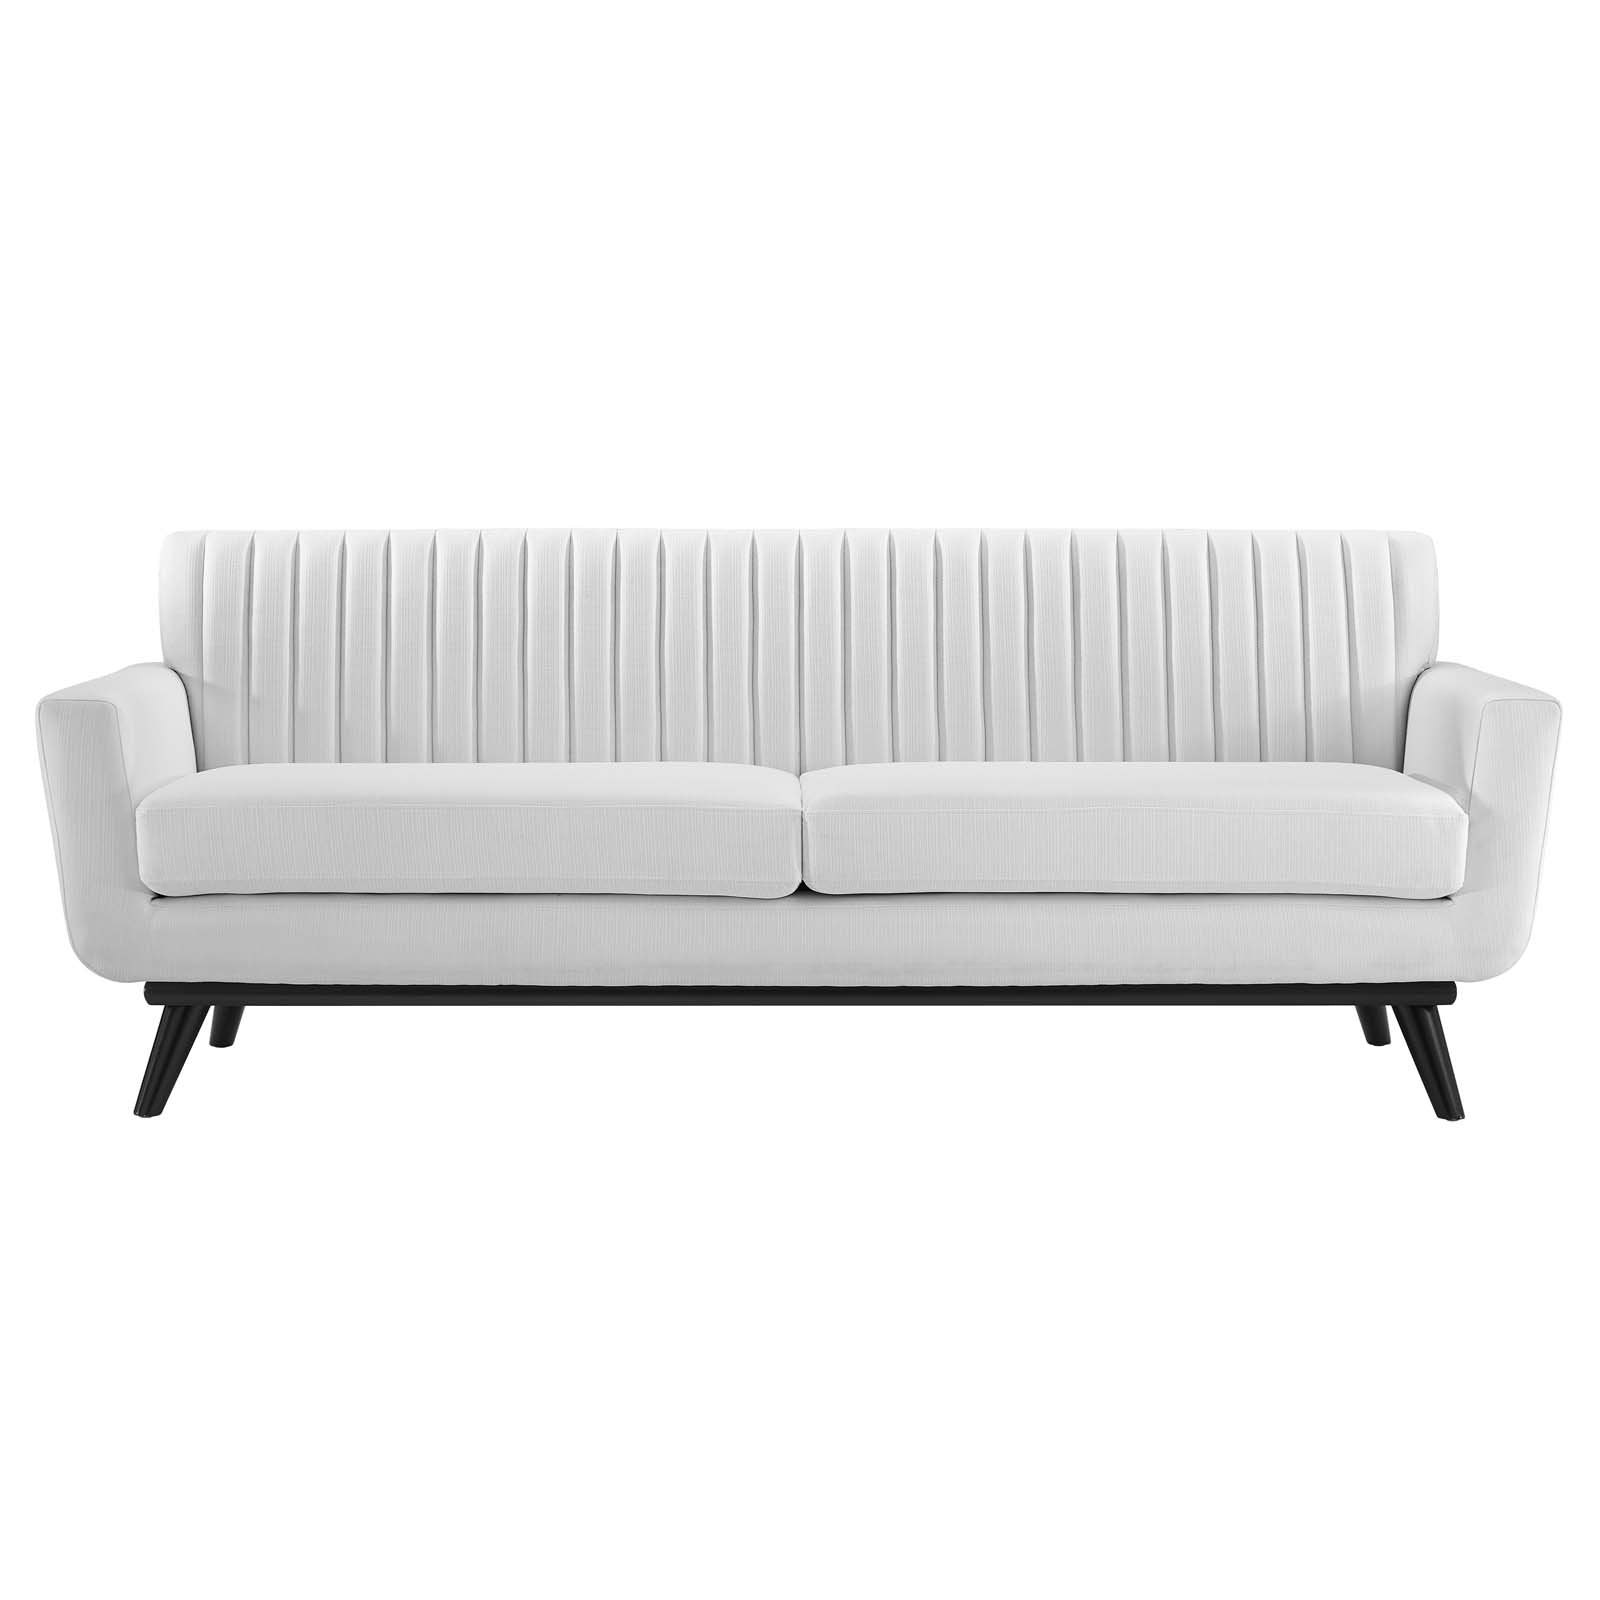 Engage Channel Tufted Fabric Sofa